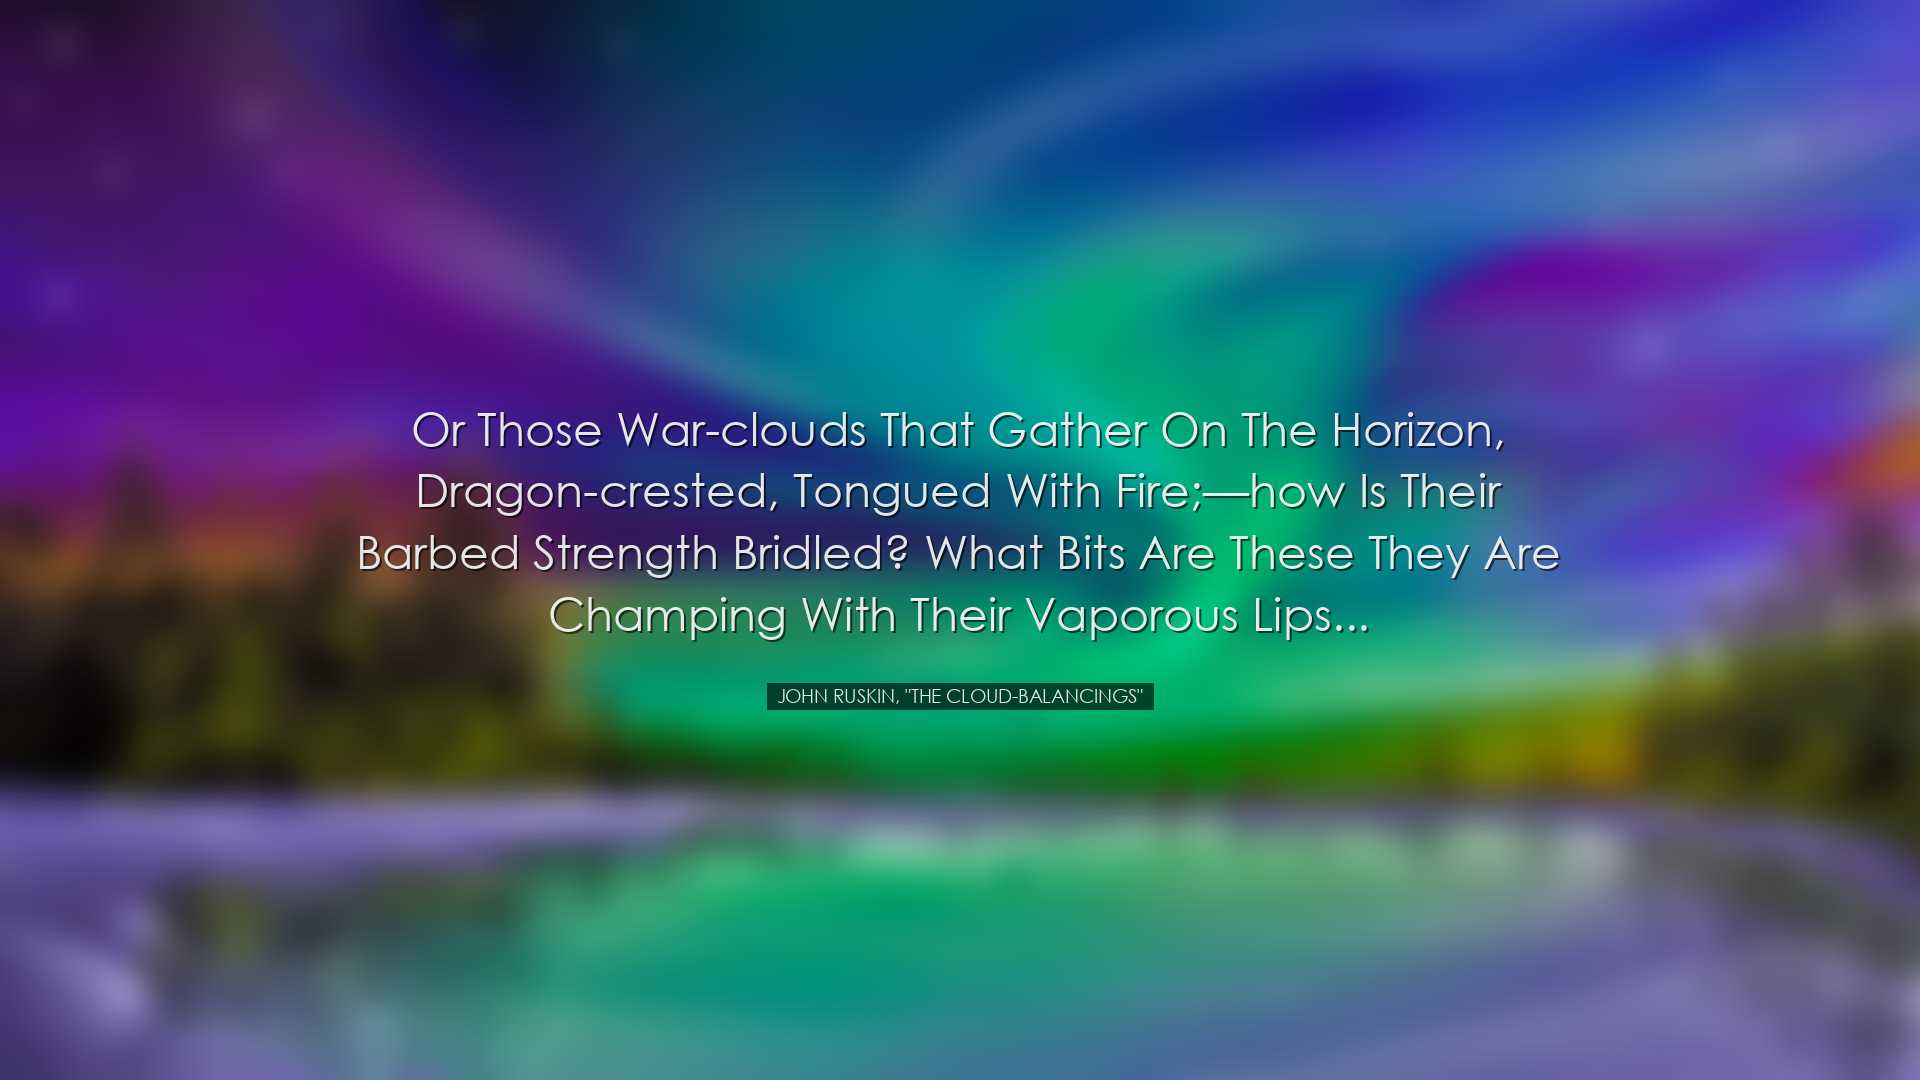 Or those war-clouds that gather on the horizon, dragon-crested, to